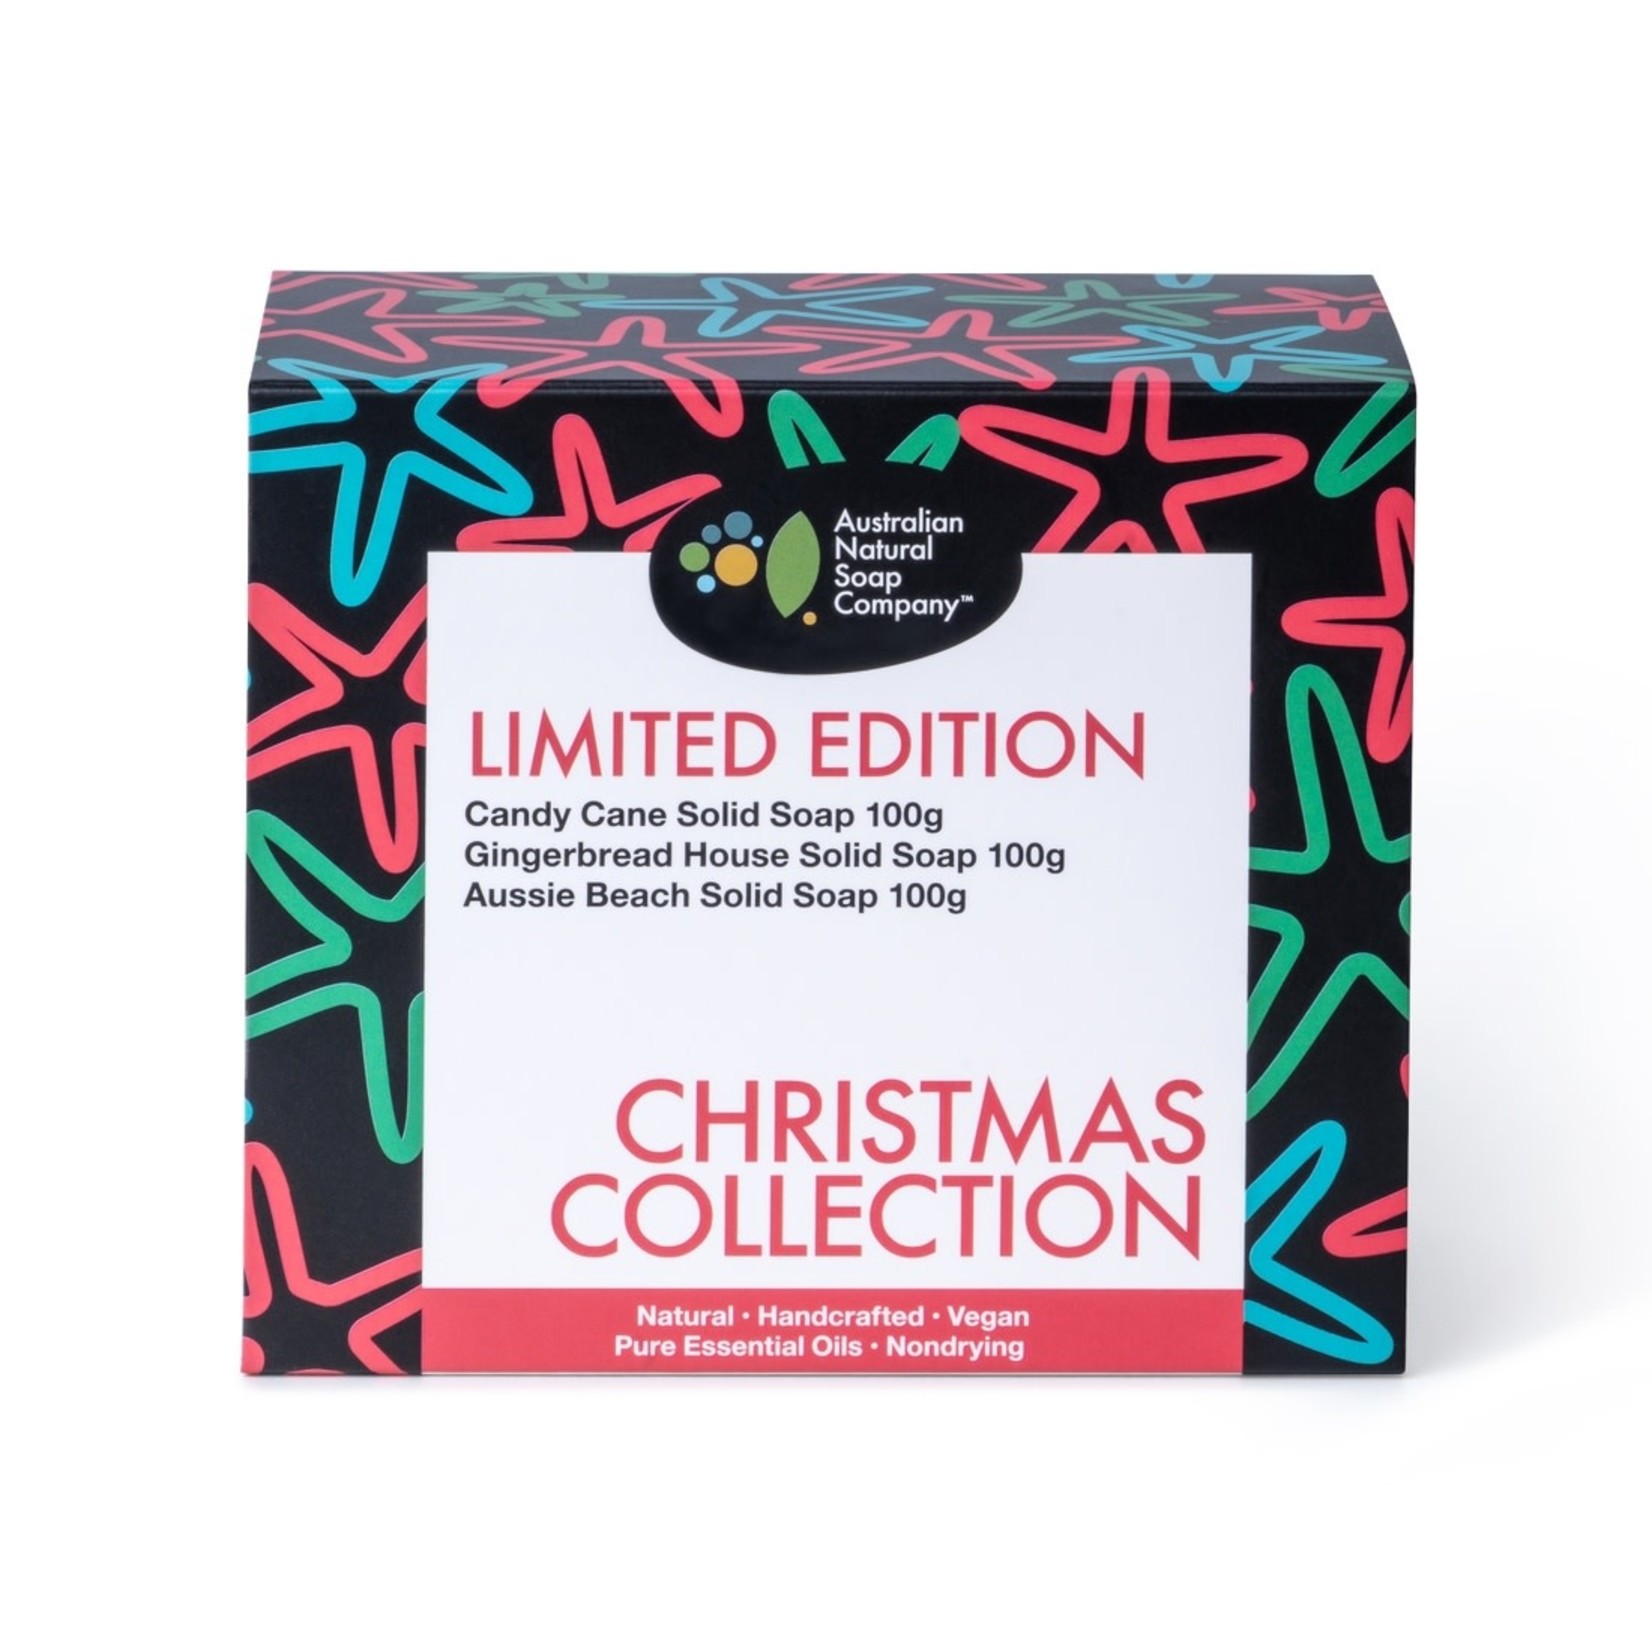 The Australian Natural Soap Company The Australian Natural Soap Company Limited Edition Christmas Collection